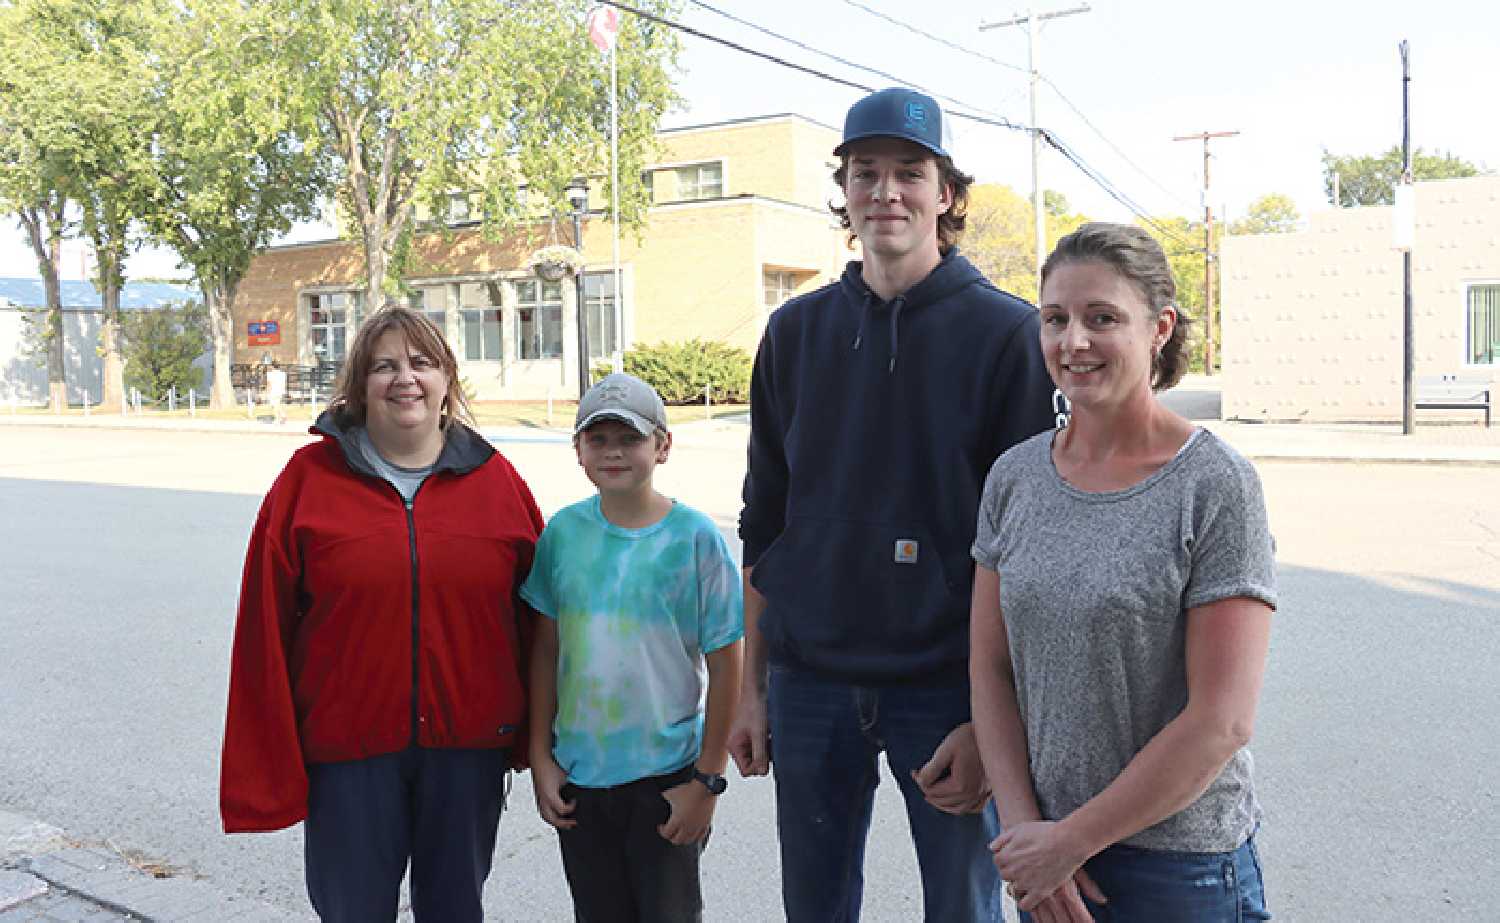 Moosomin’s 4-H Multi Club members (left) May and Lincoln Swanson, along with Kale and Trudi Holmstrom spoke about the group’s interest for various program initiatives, such as sewing, public speaking, archery and more.